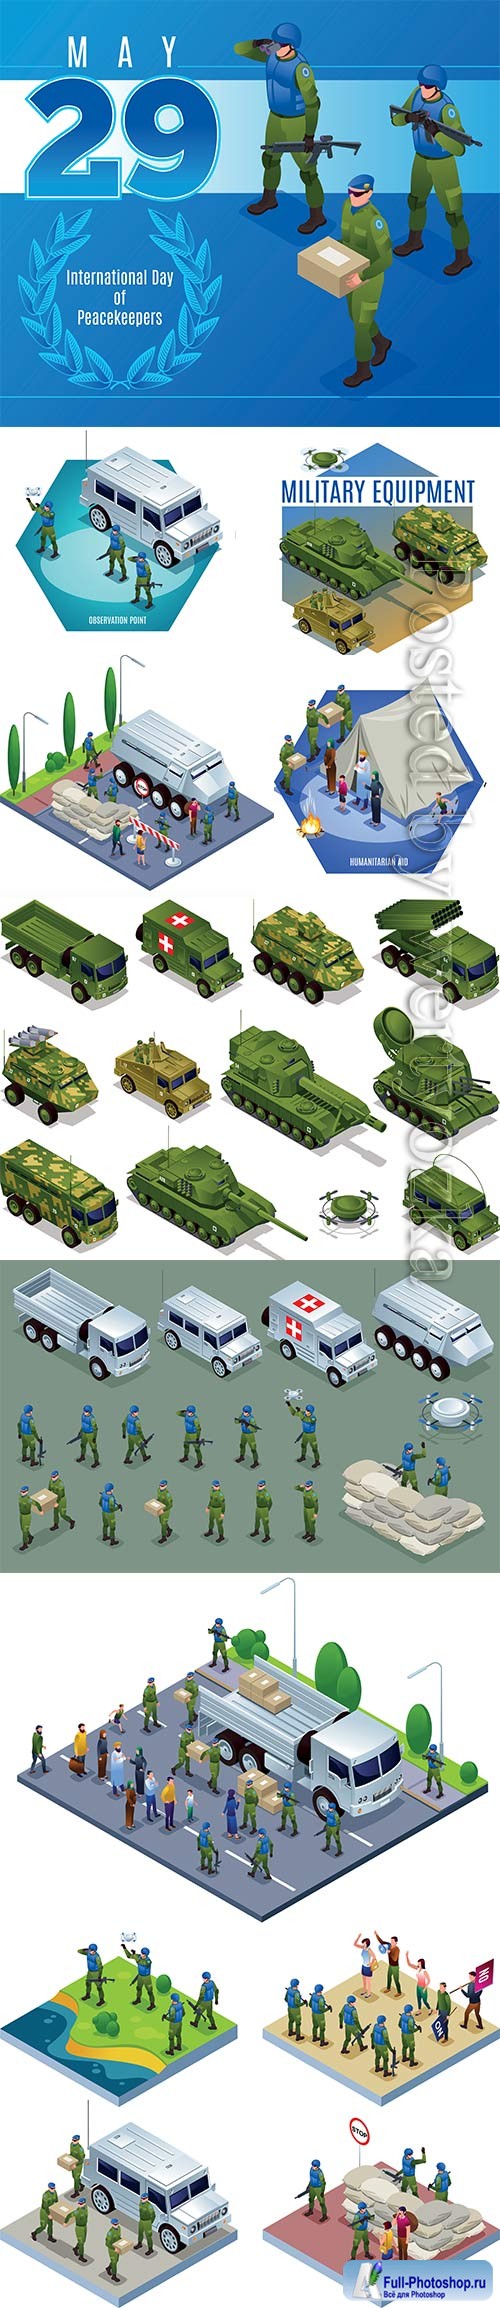 Army transport combat vehicles collection with tanks military vehicles set isometric icons